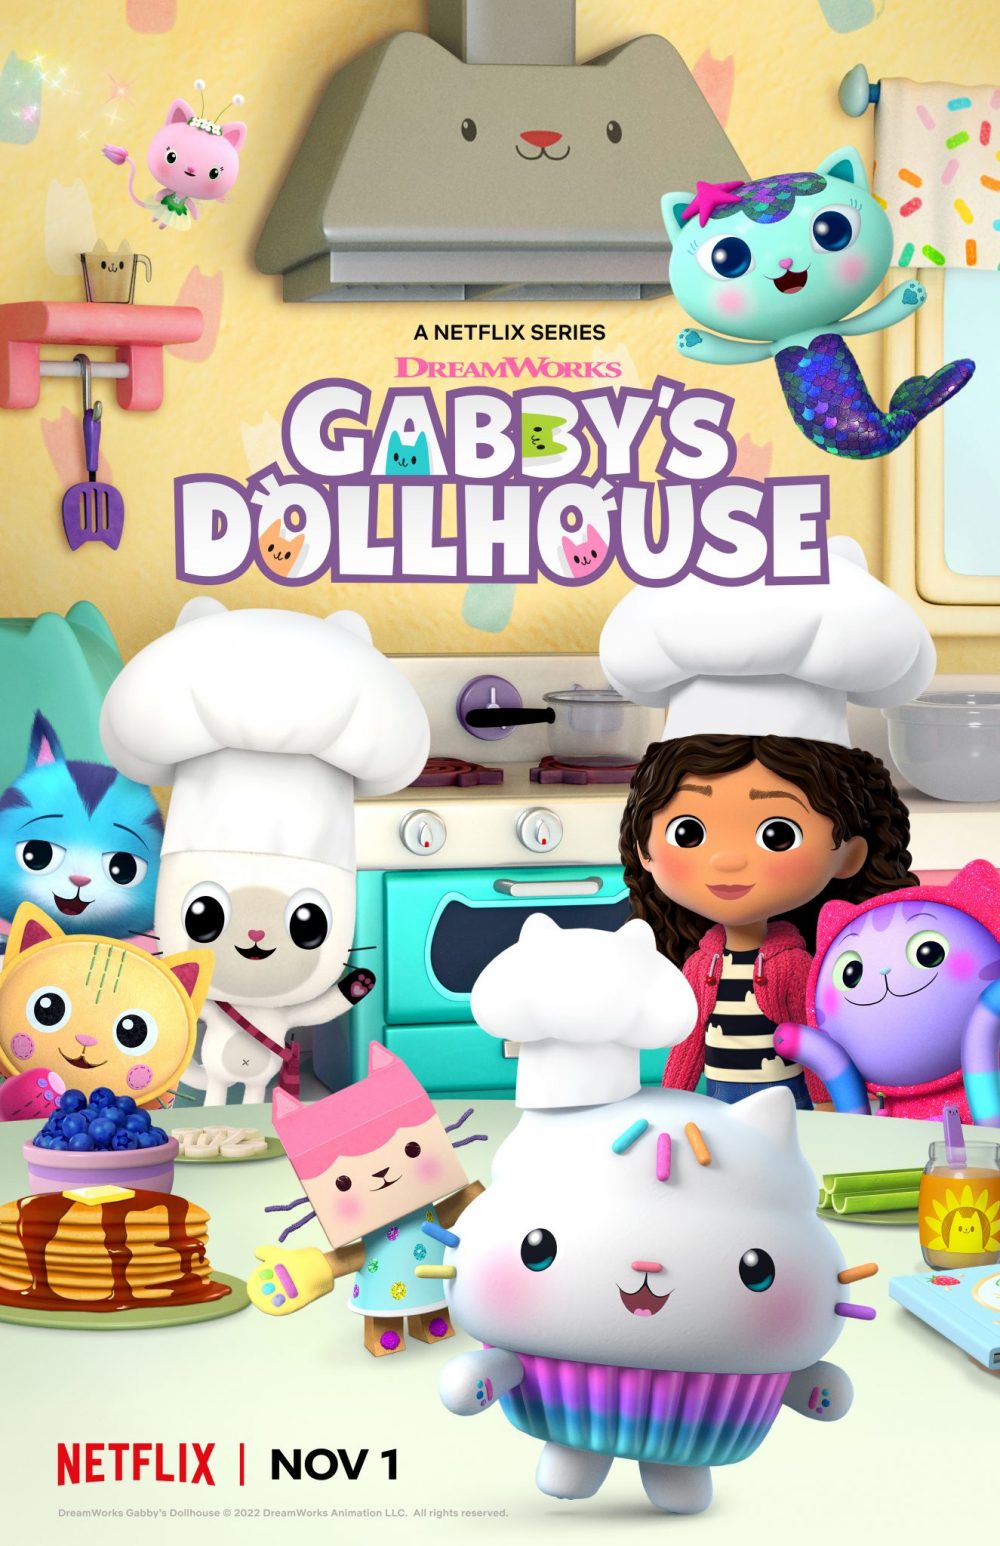 Watch the Trailer for New Episodes of Gabby’s Dollhouse on Netflix by DreamWorks Animation